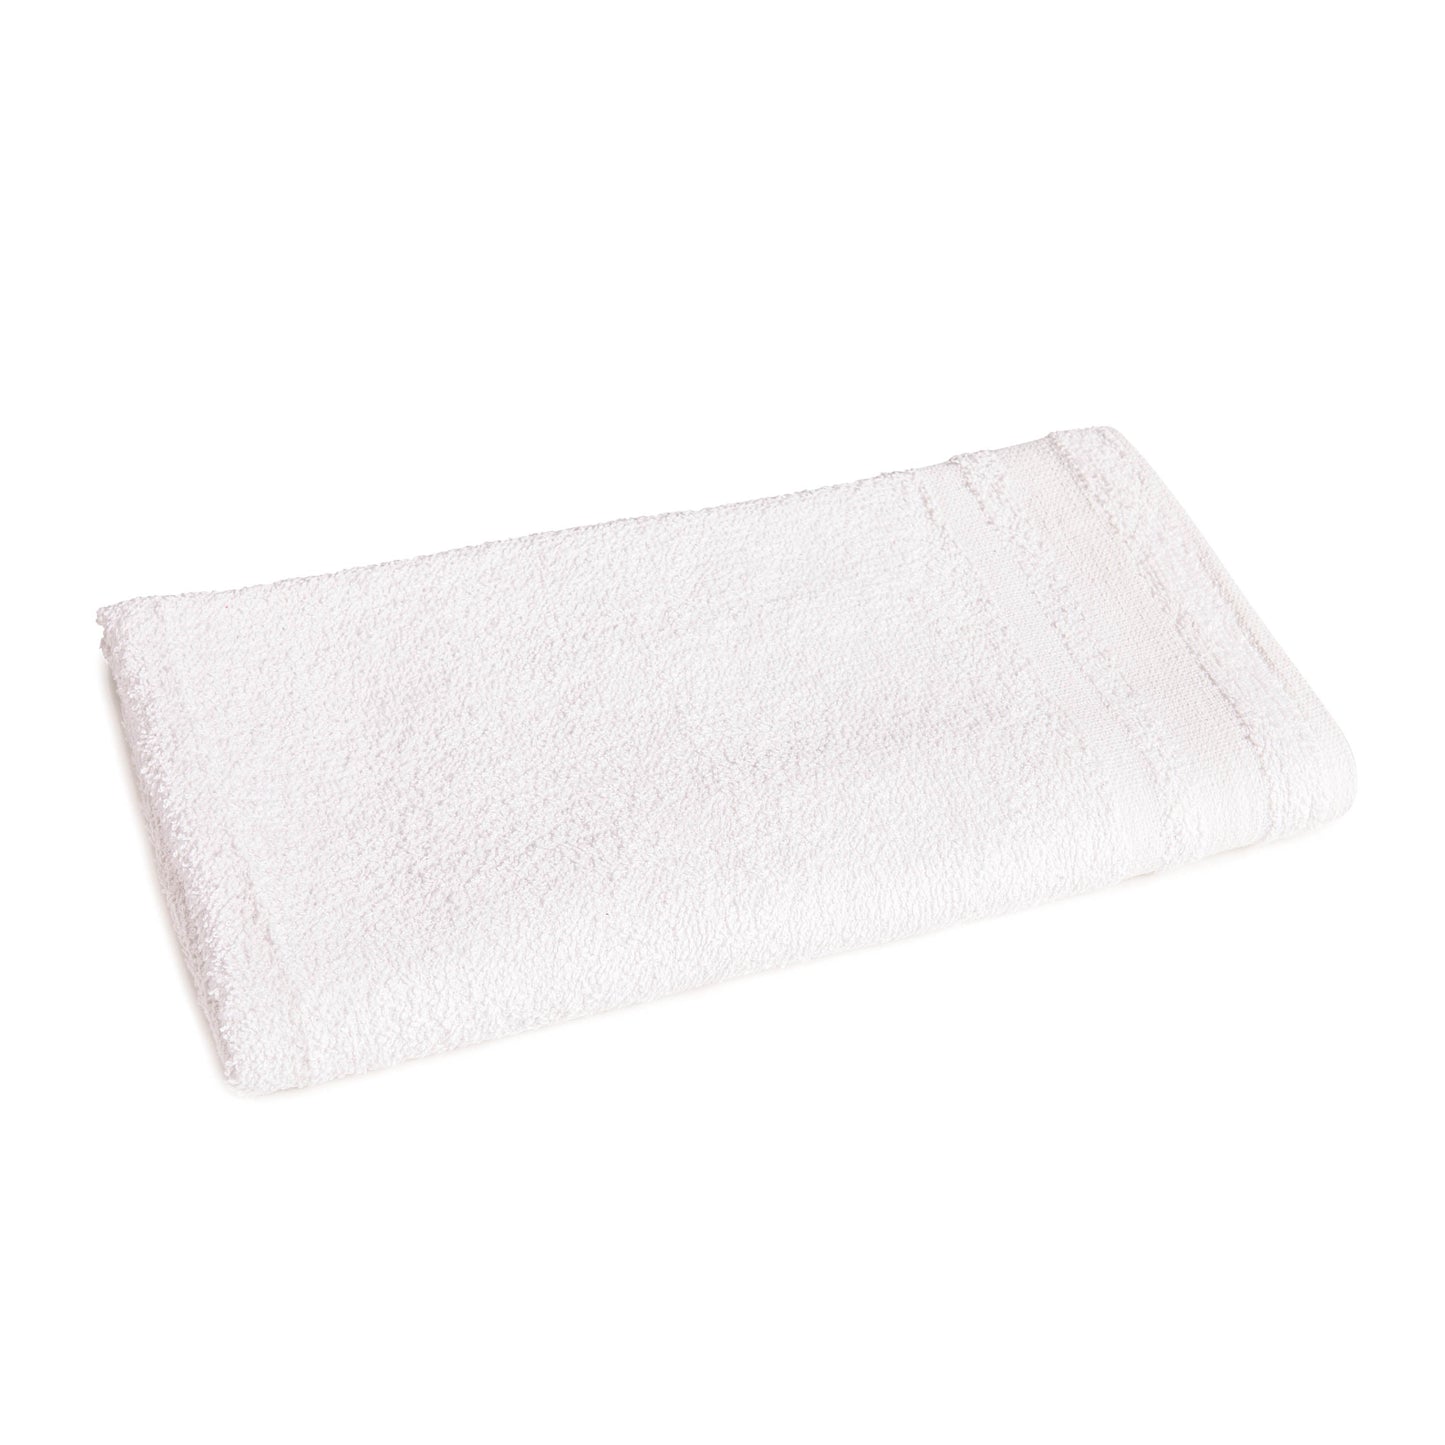 American Dawn | 24X48 Inch White With Double Cam Healthcare Towel | Terry Towel